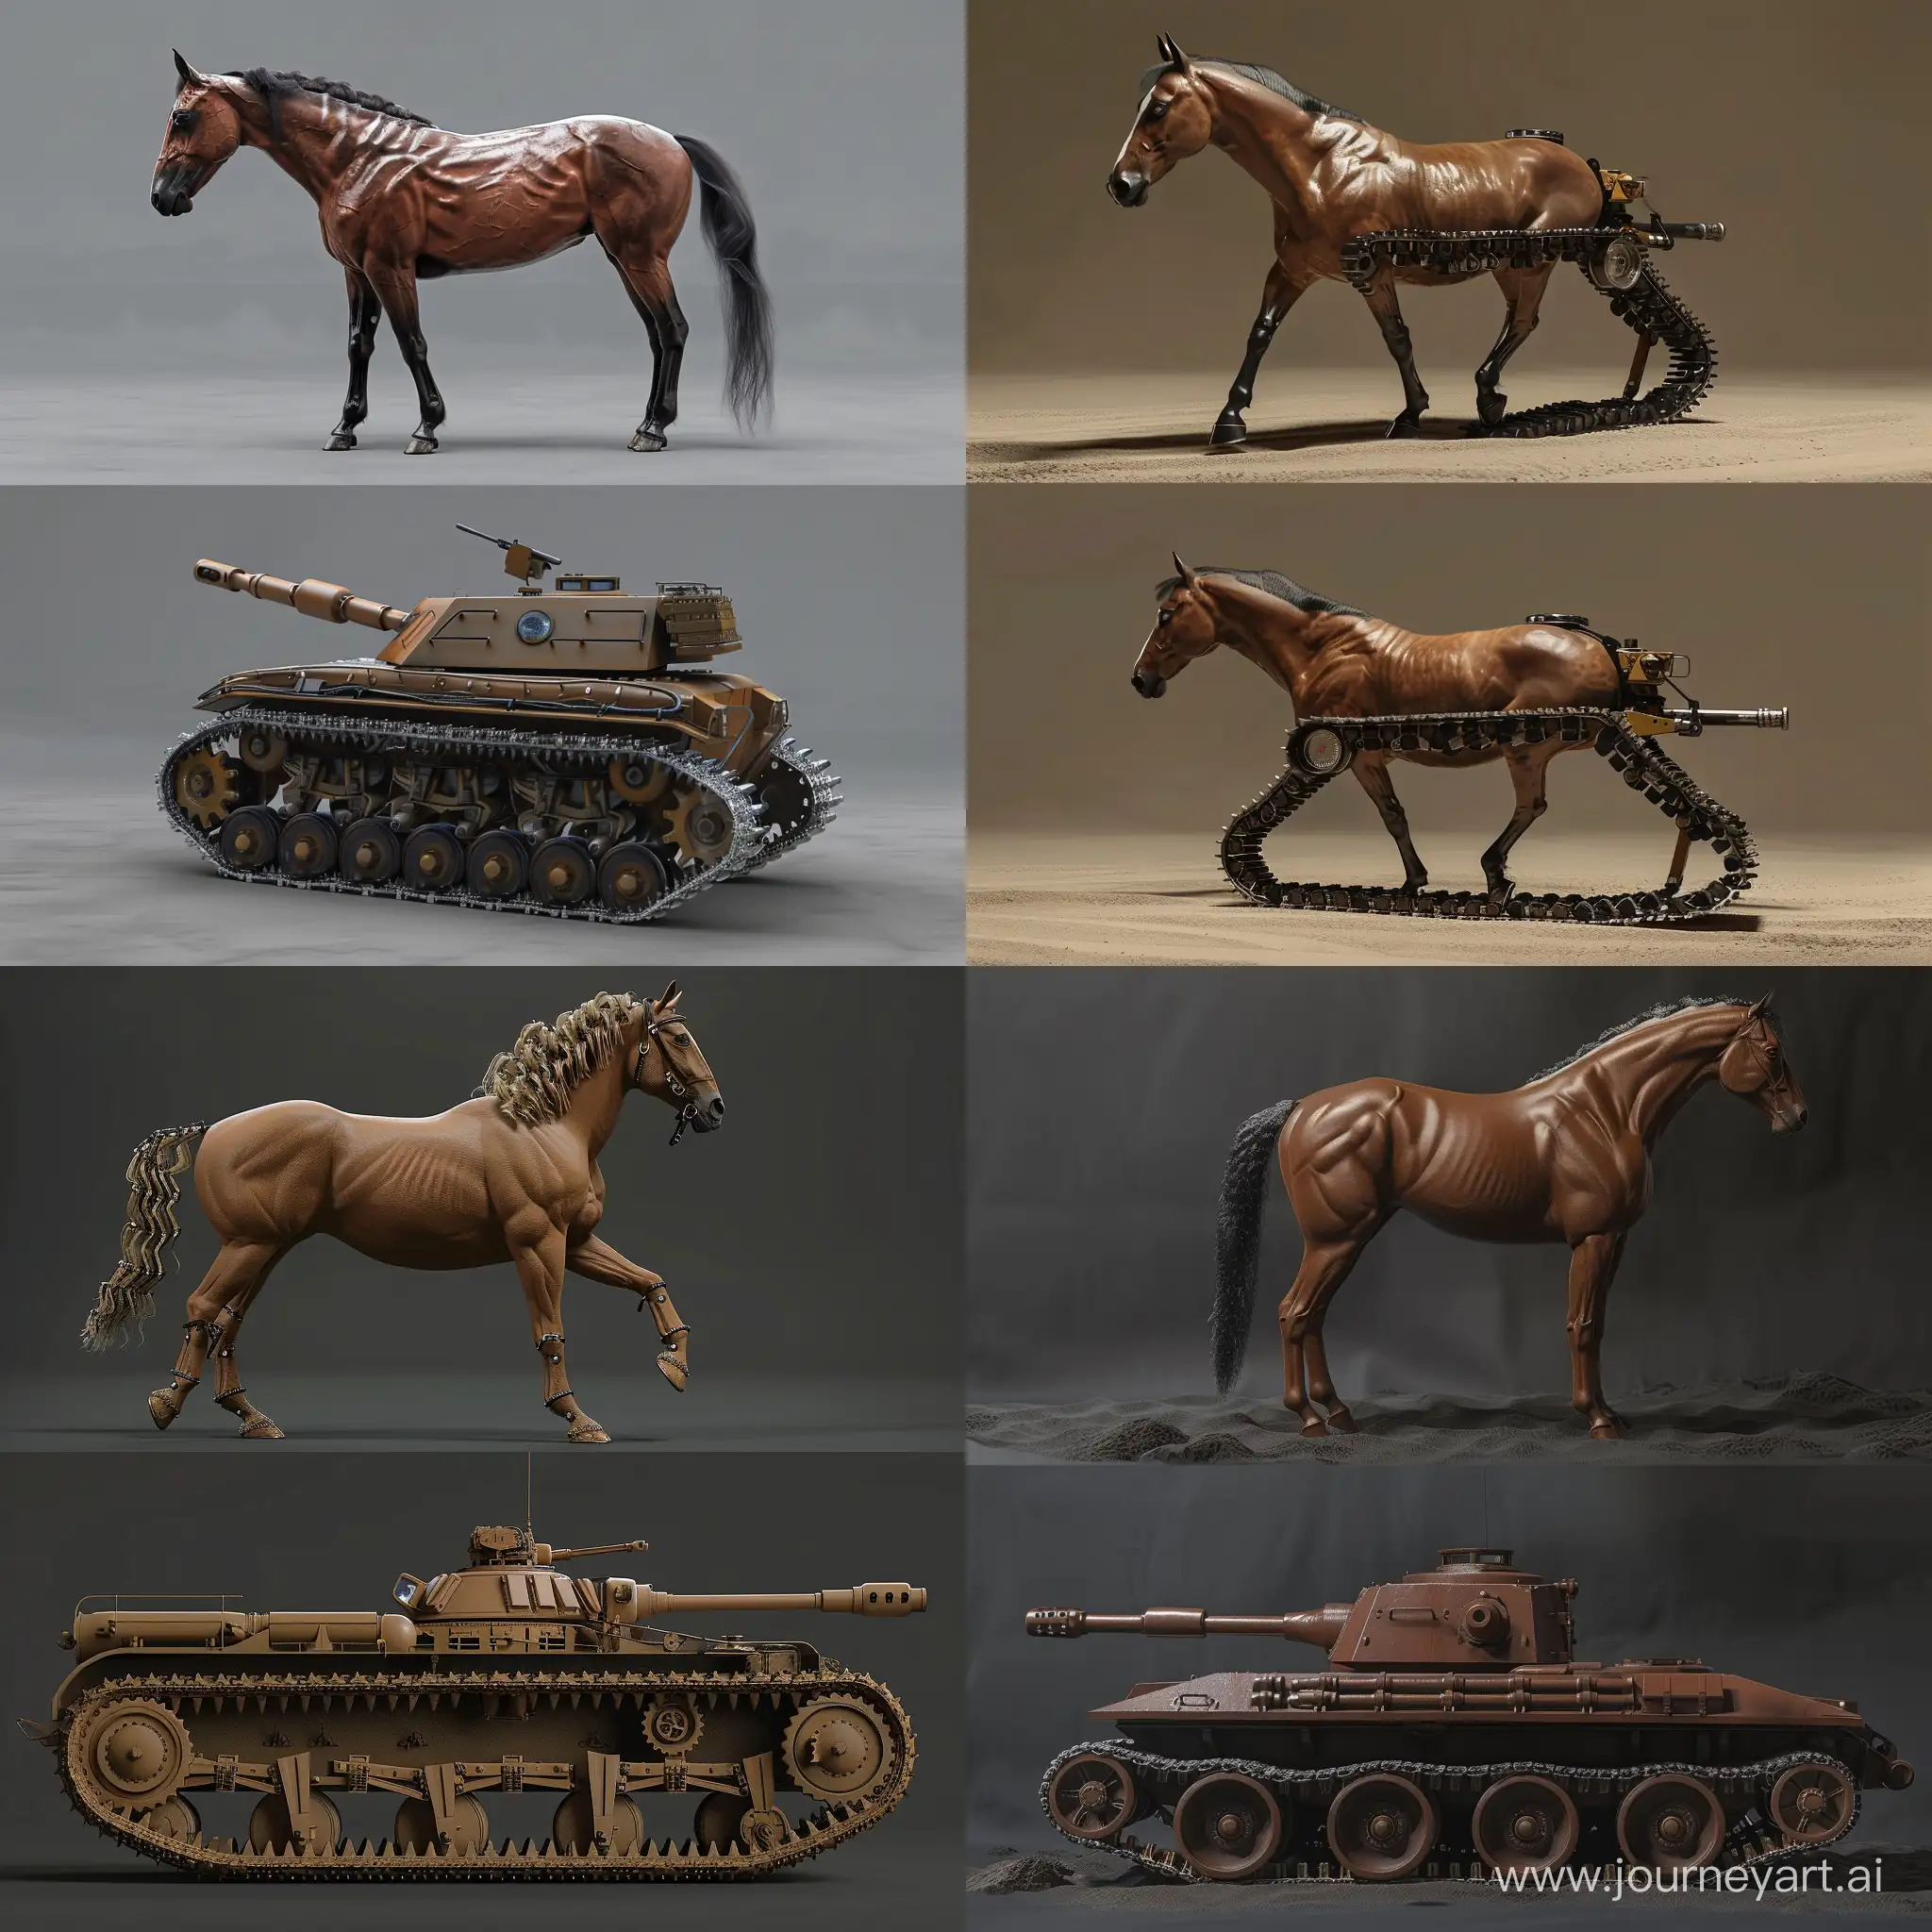 Realistic horse and tank fusion. Top horse, bottom caterpillar tracks for movement.